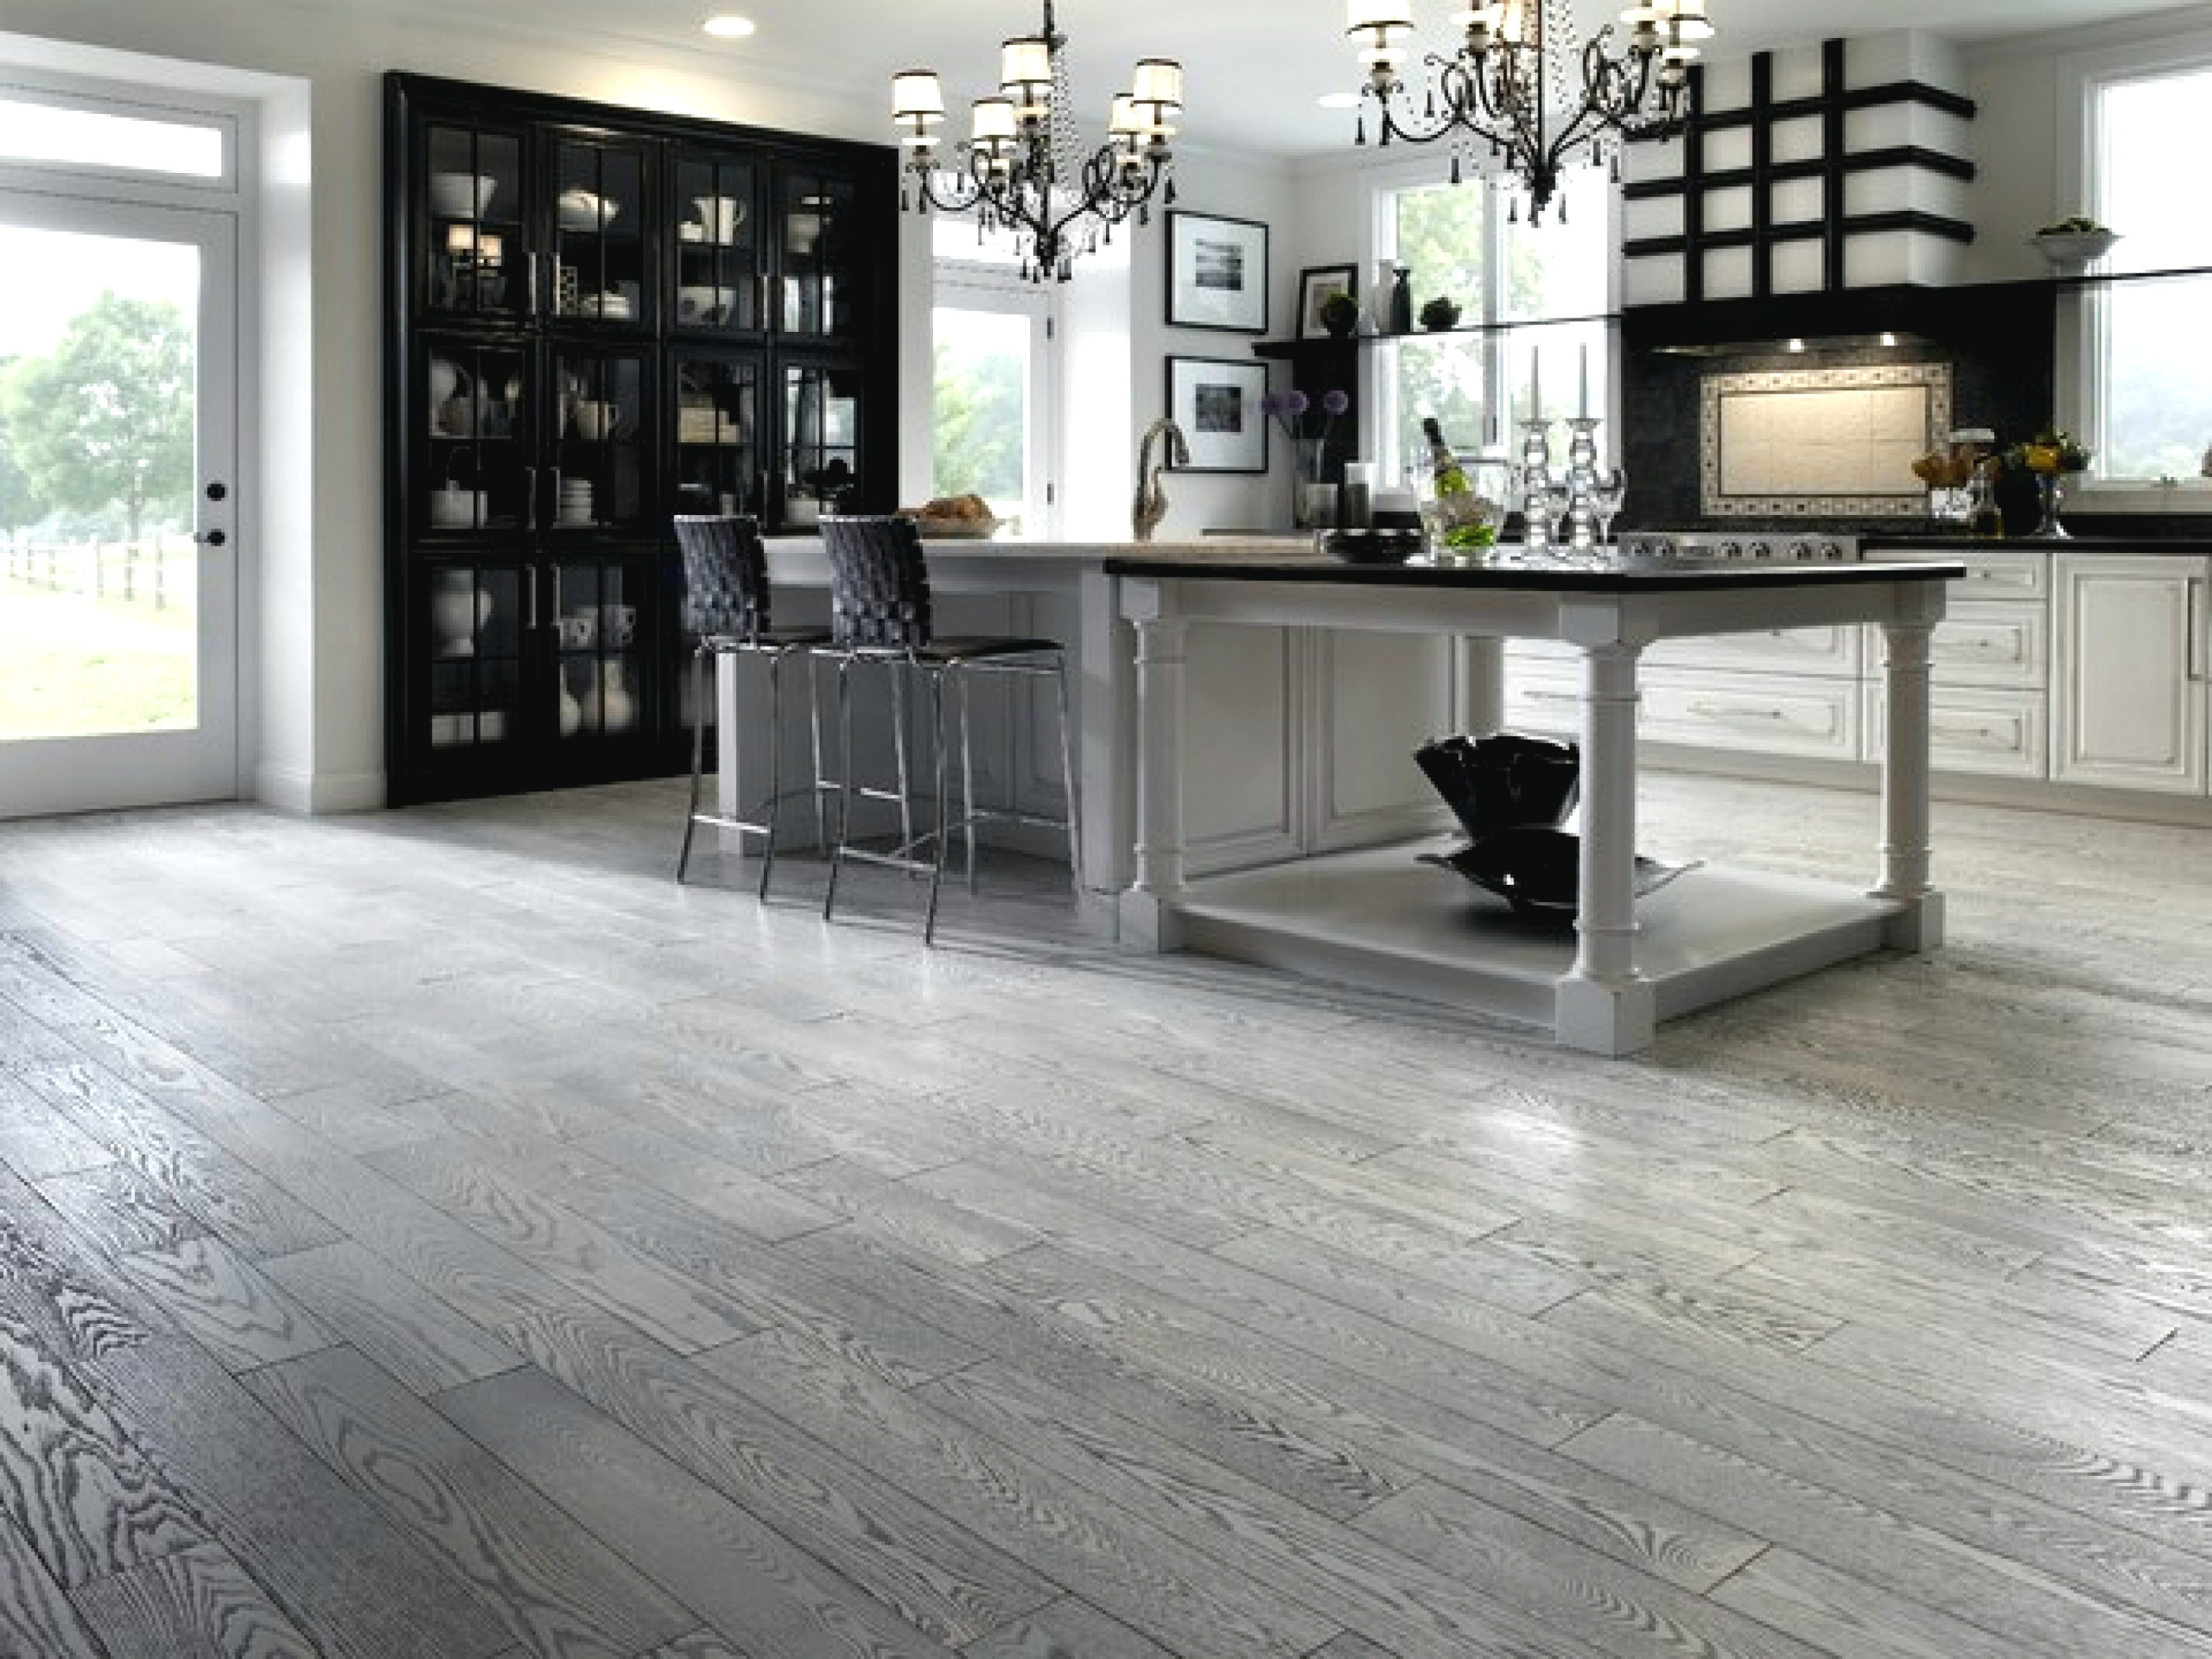 25 attractive Pictures Of Gray Hardwood Floors 2024 free download pictures of gray hardwood floors of grey stained kitchen cabinets inspirational floor grey hardwood pertaining to floor grey hardwood floors gray flooring staingrey in kitchen